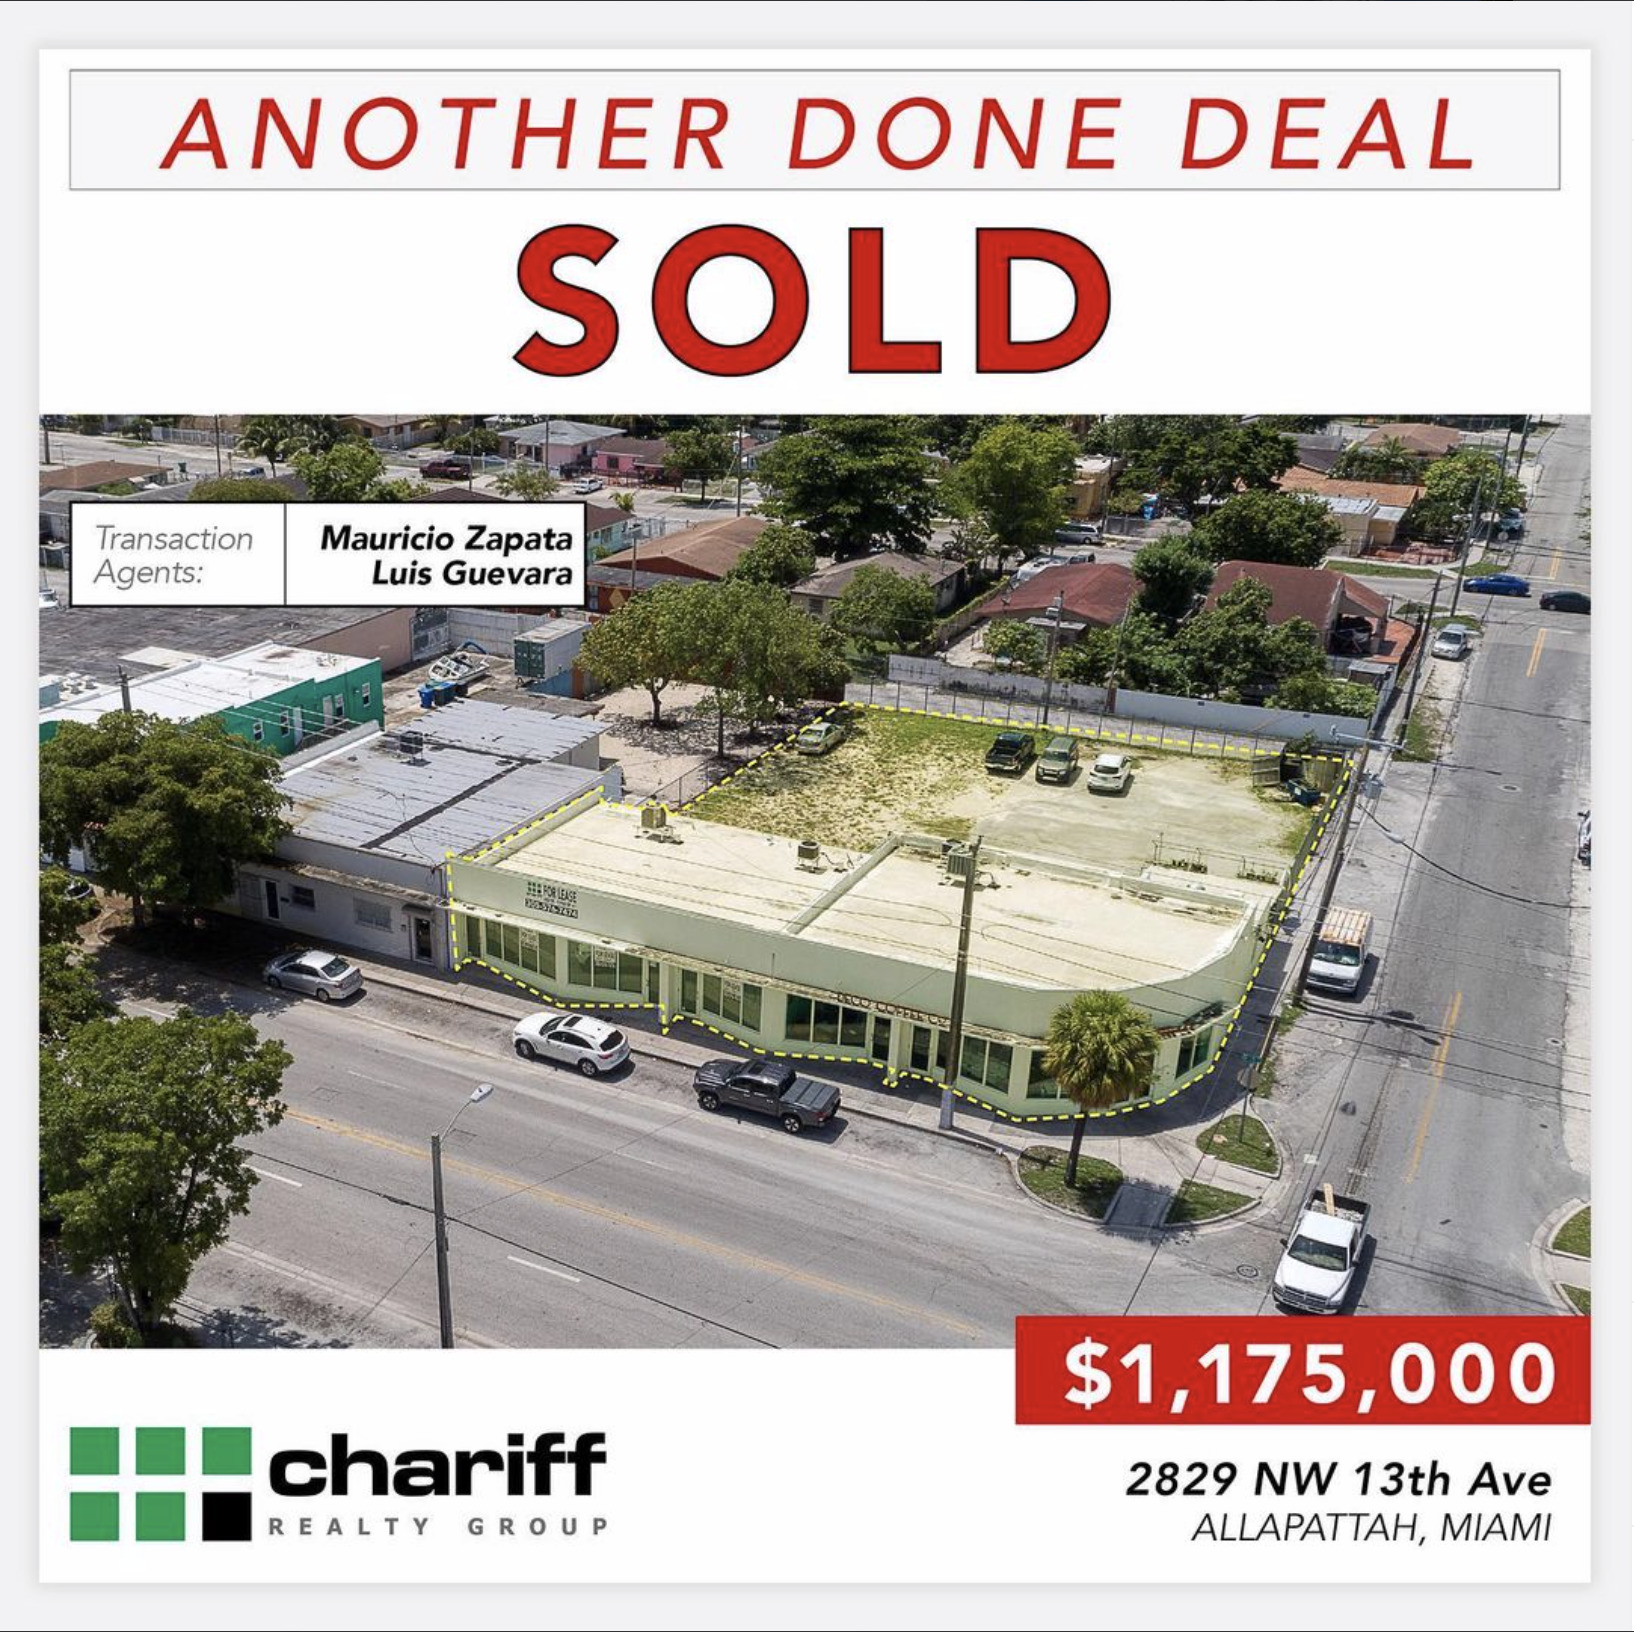 2829 NW 13th Ave - Another Done Deal - Miami - Allapatah - Sold - Chariff Realty Group